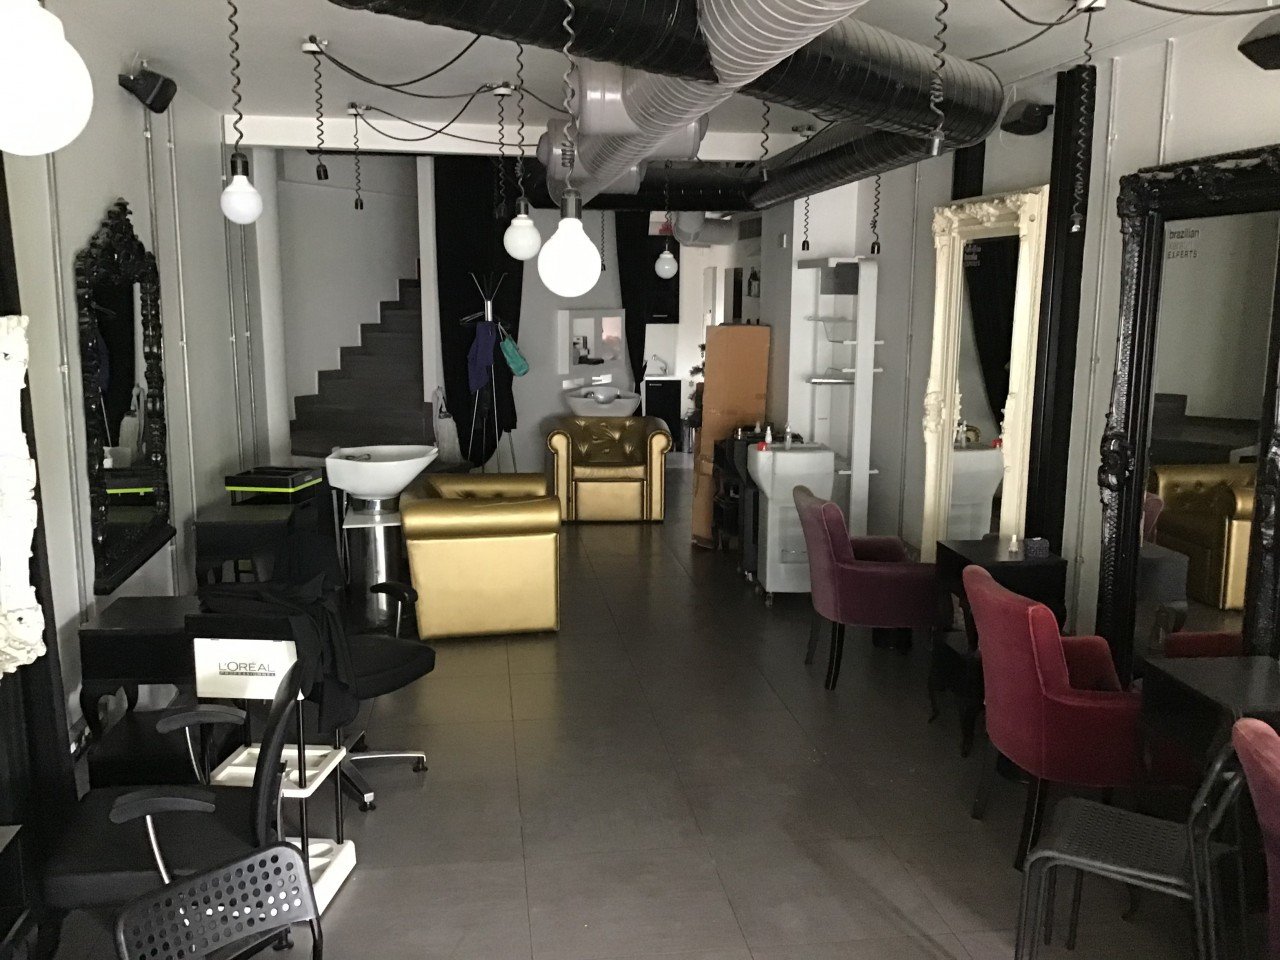 Property for Rent: Commercial (Shop) in City Center, Nicosia for Rent | Key Realtor Cyprus